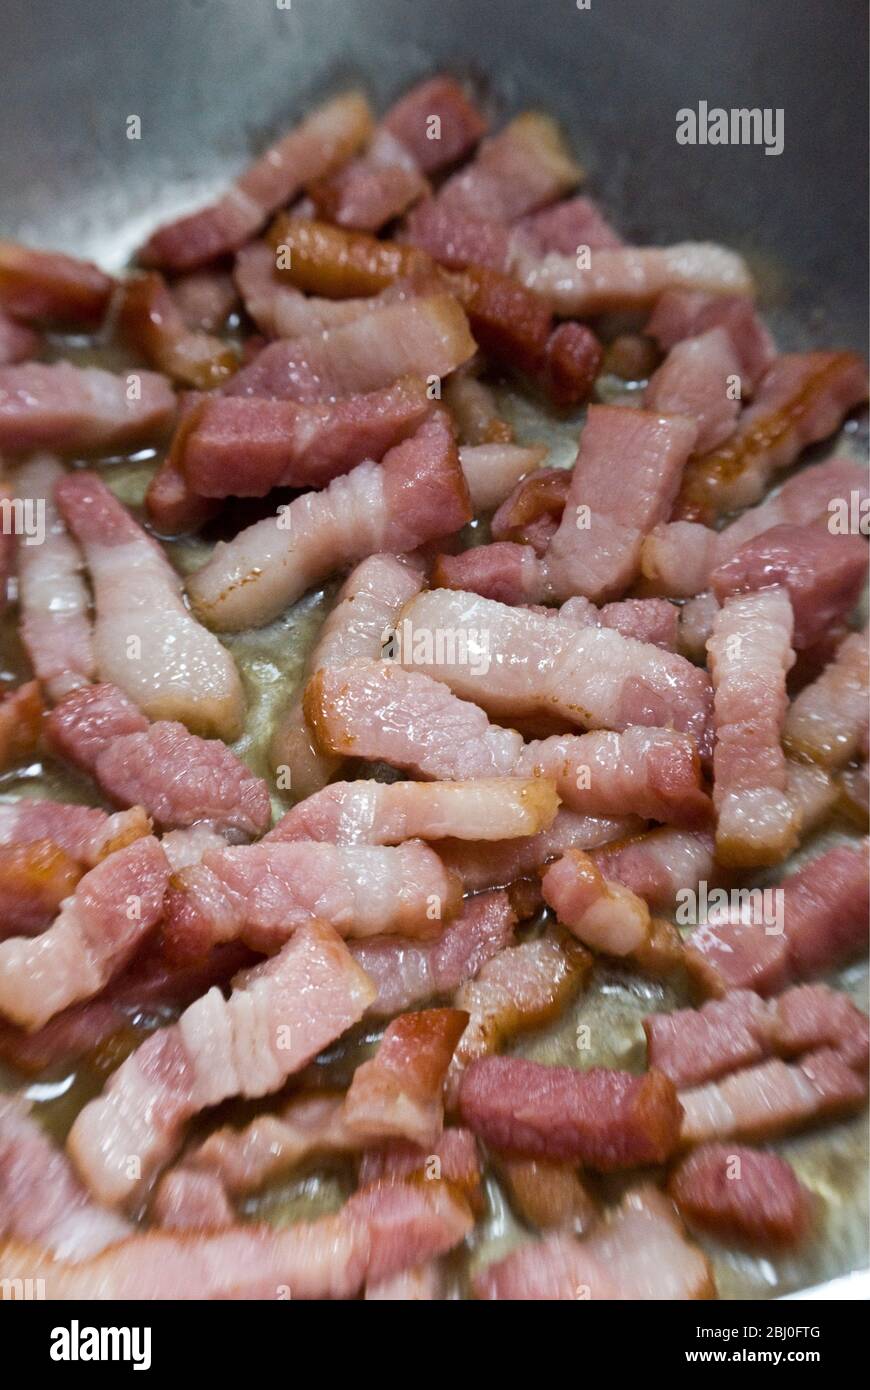 Cooking chopped pieces of streaky bacon in a frying pan. Known as pancetta in Italy and lardons in France - Stock Photo